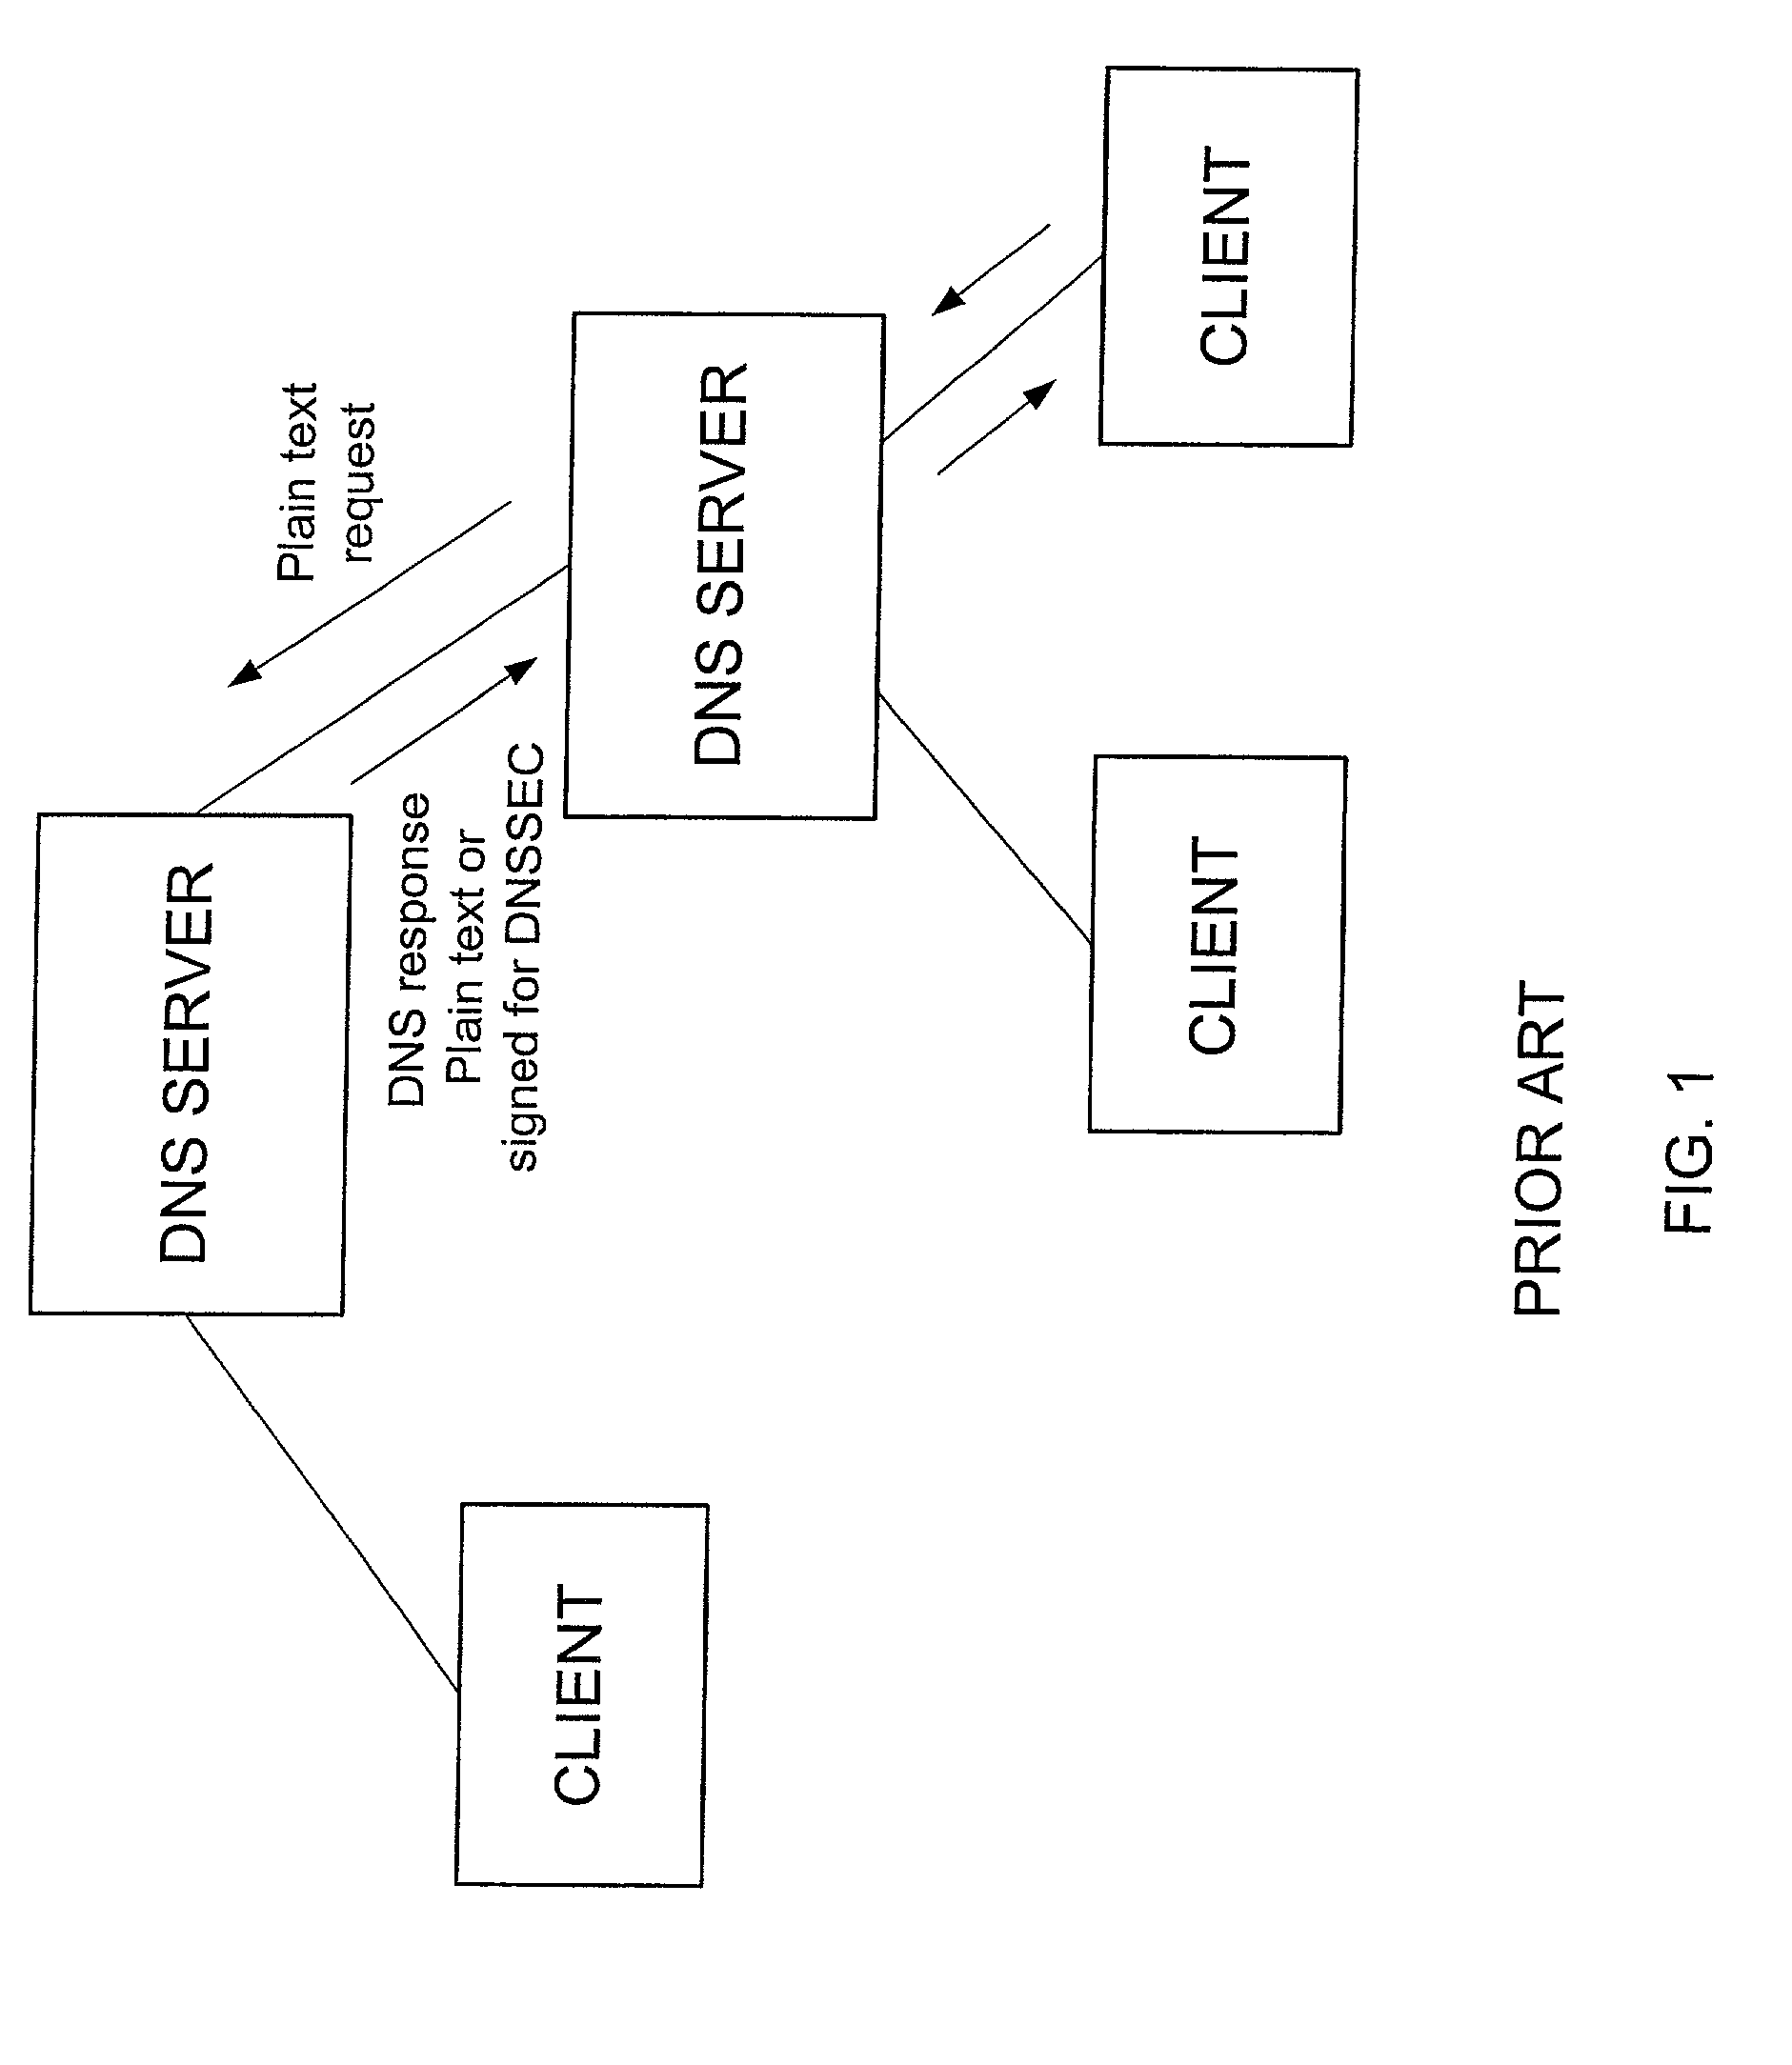 DNS server access control system and method